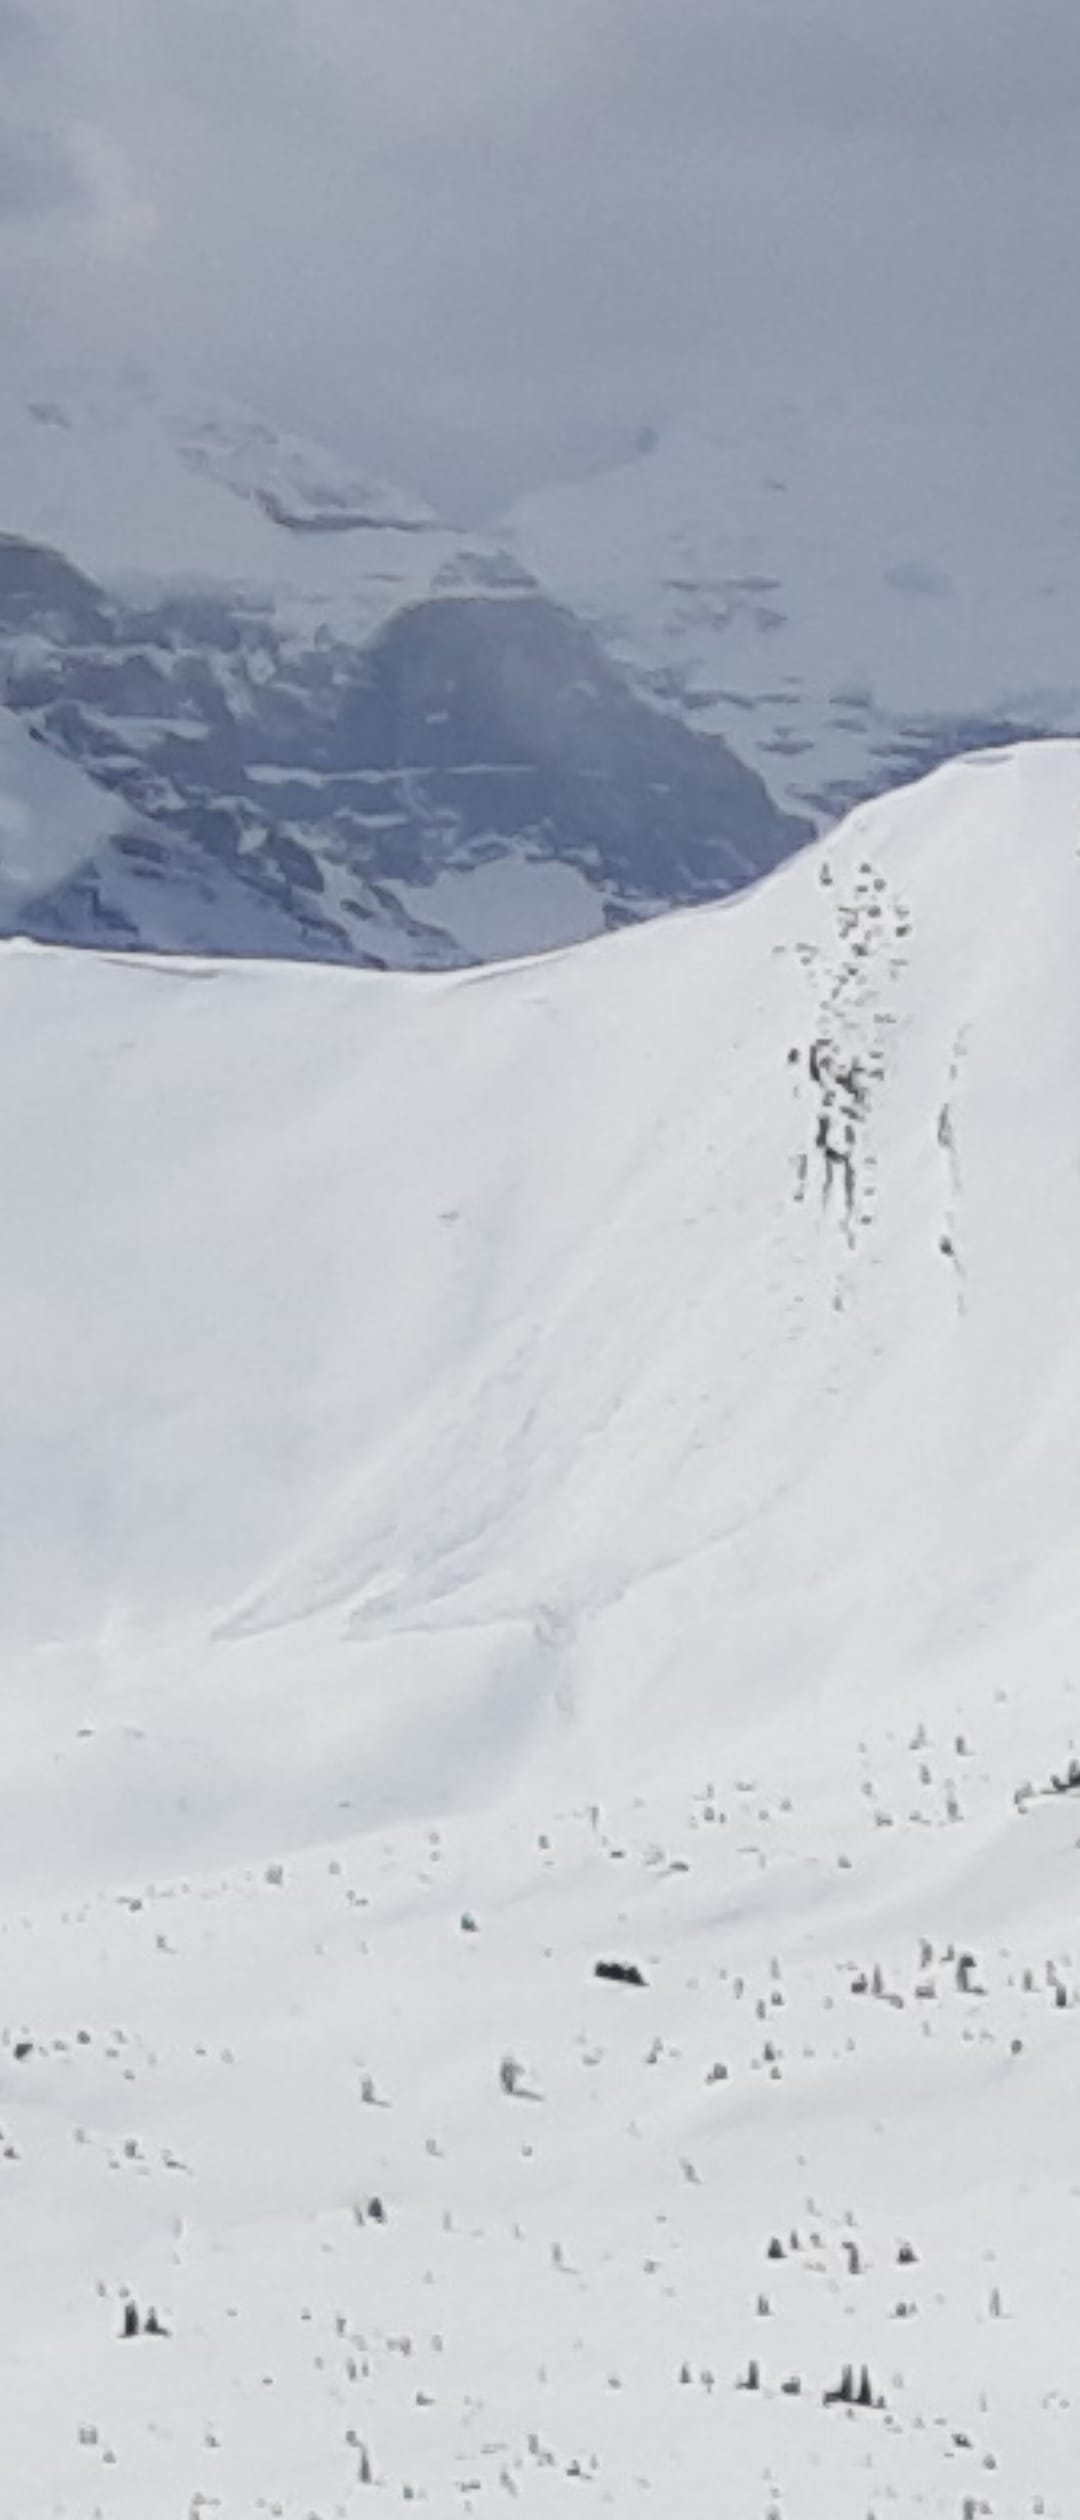 Another Persistent slab avalanche in hidden Bowl.  Looks up to a week old.